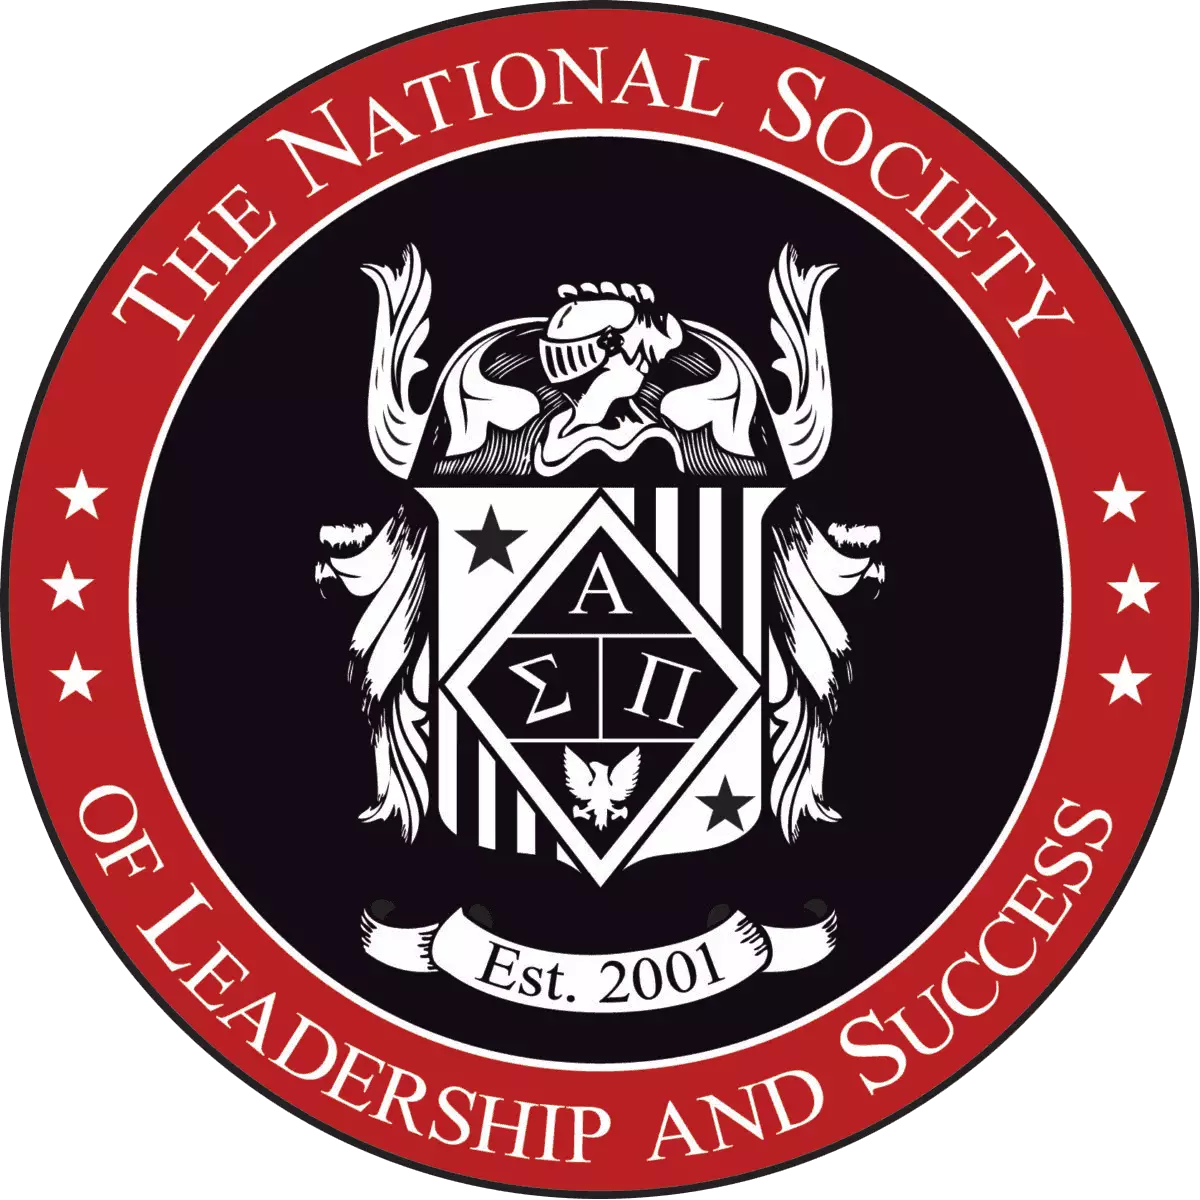 The National Society of 领导 and Success seal